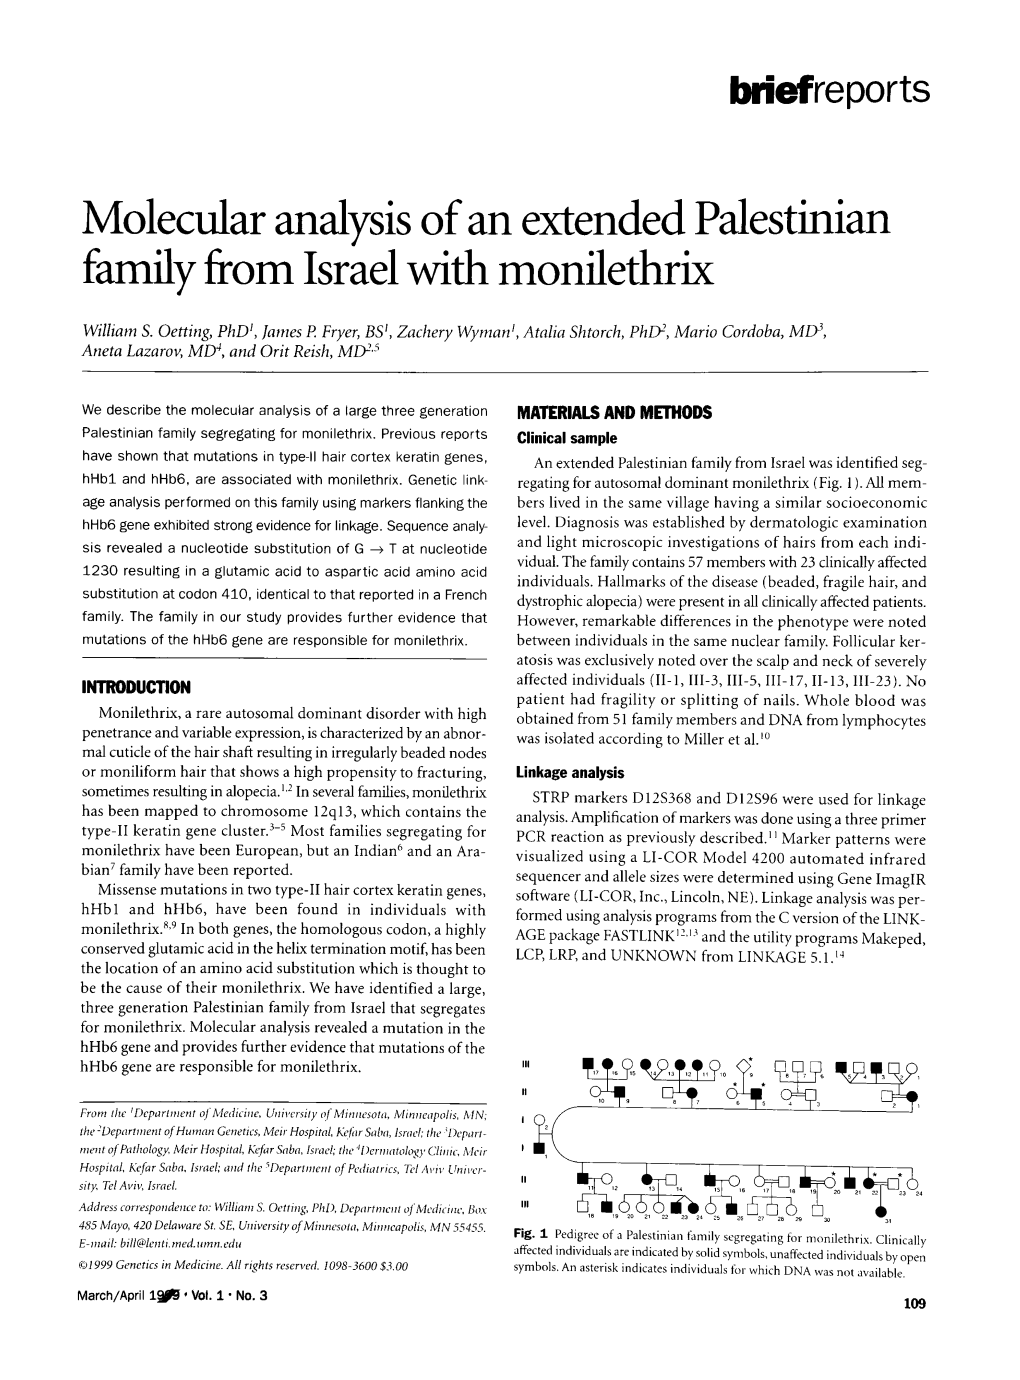 Molecular Analvsis of an Extended Palestinian Family from 1Srae1 with Monilethrix